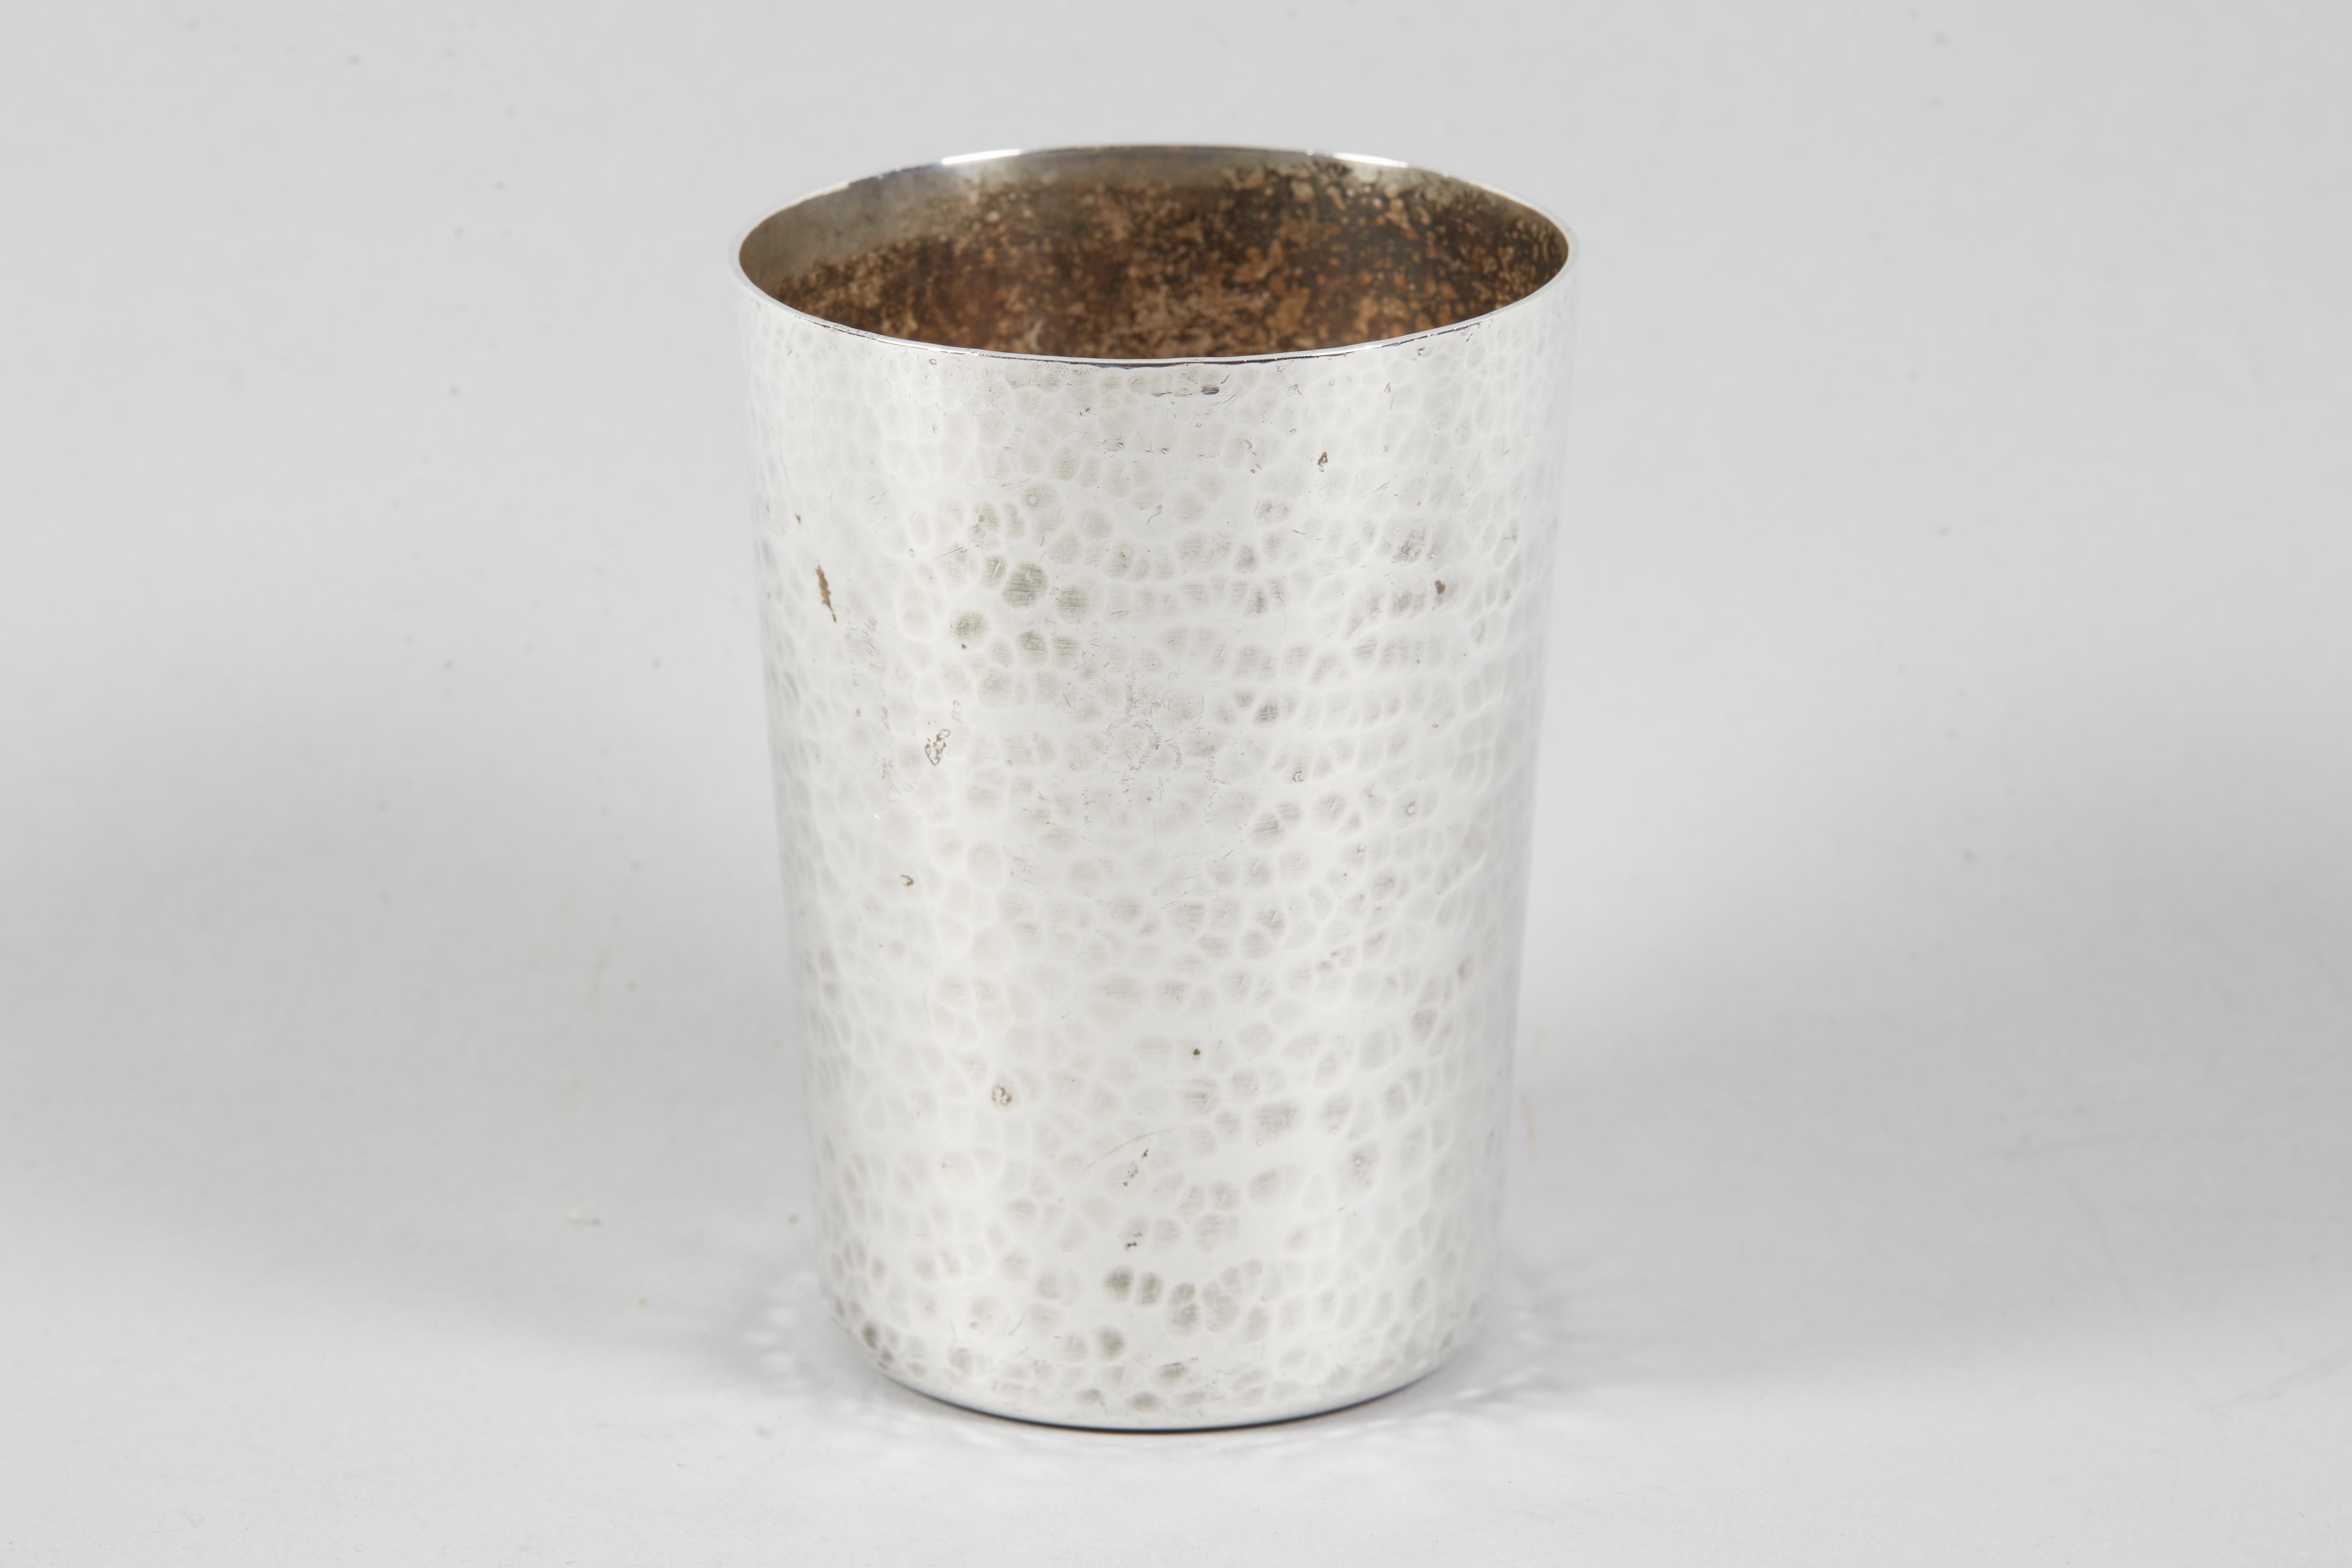 Hand hammered silver plate Kiddush cup with applied Hebrew text: 